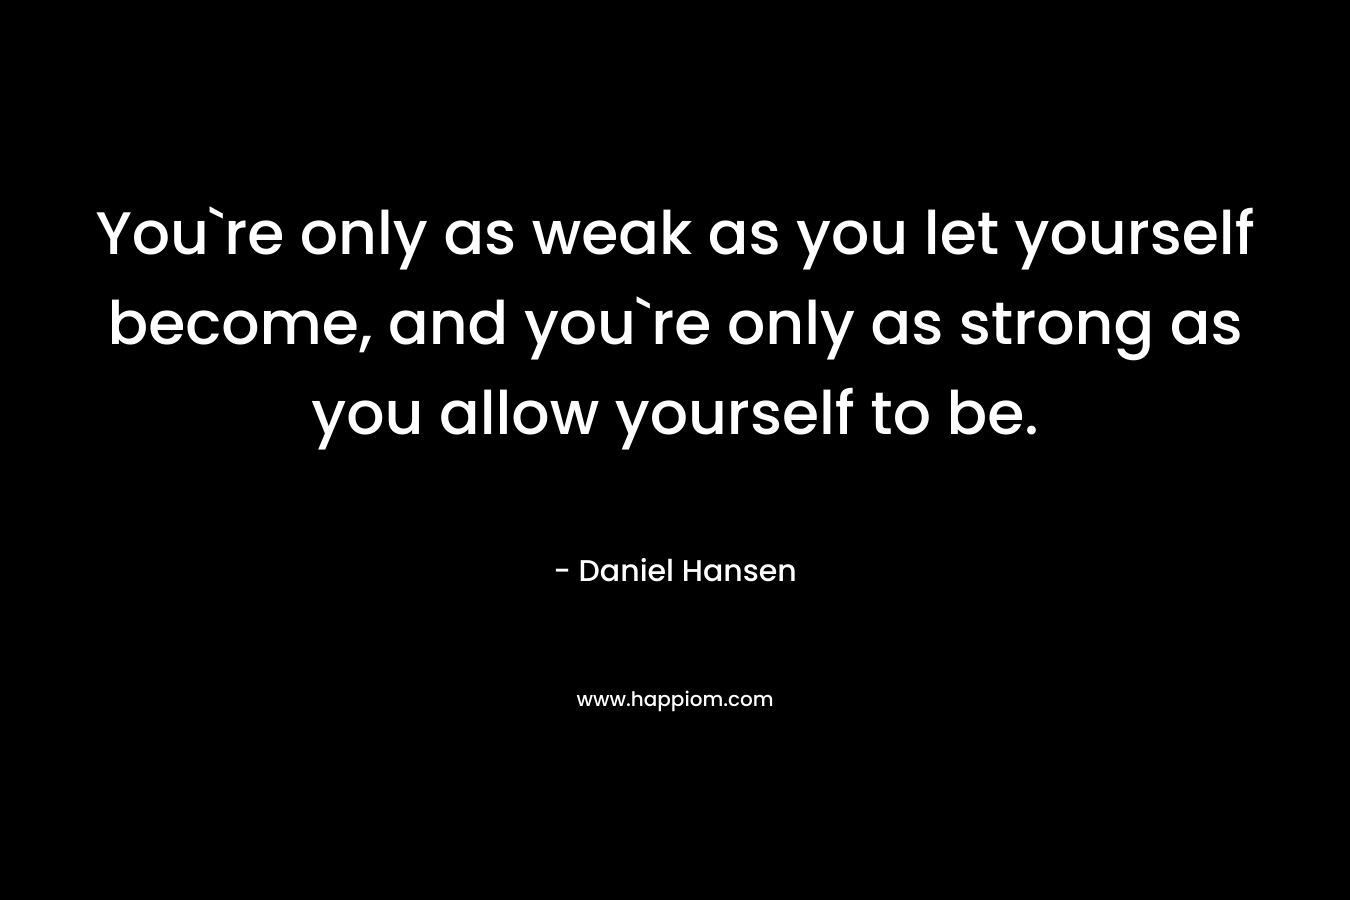 You`re only as weak as you let yourself become, and you`re only as strong as you allow yourself to be.